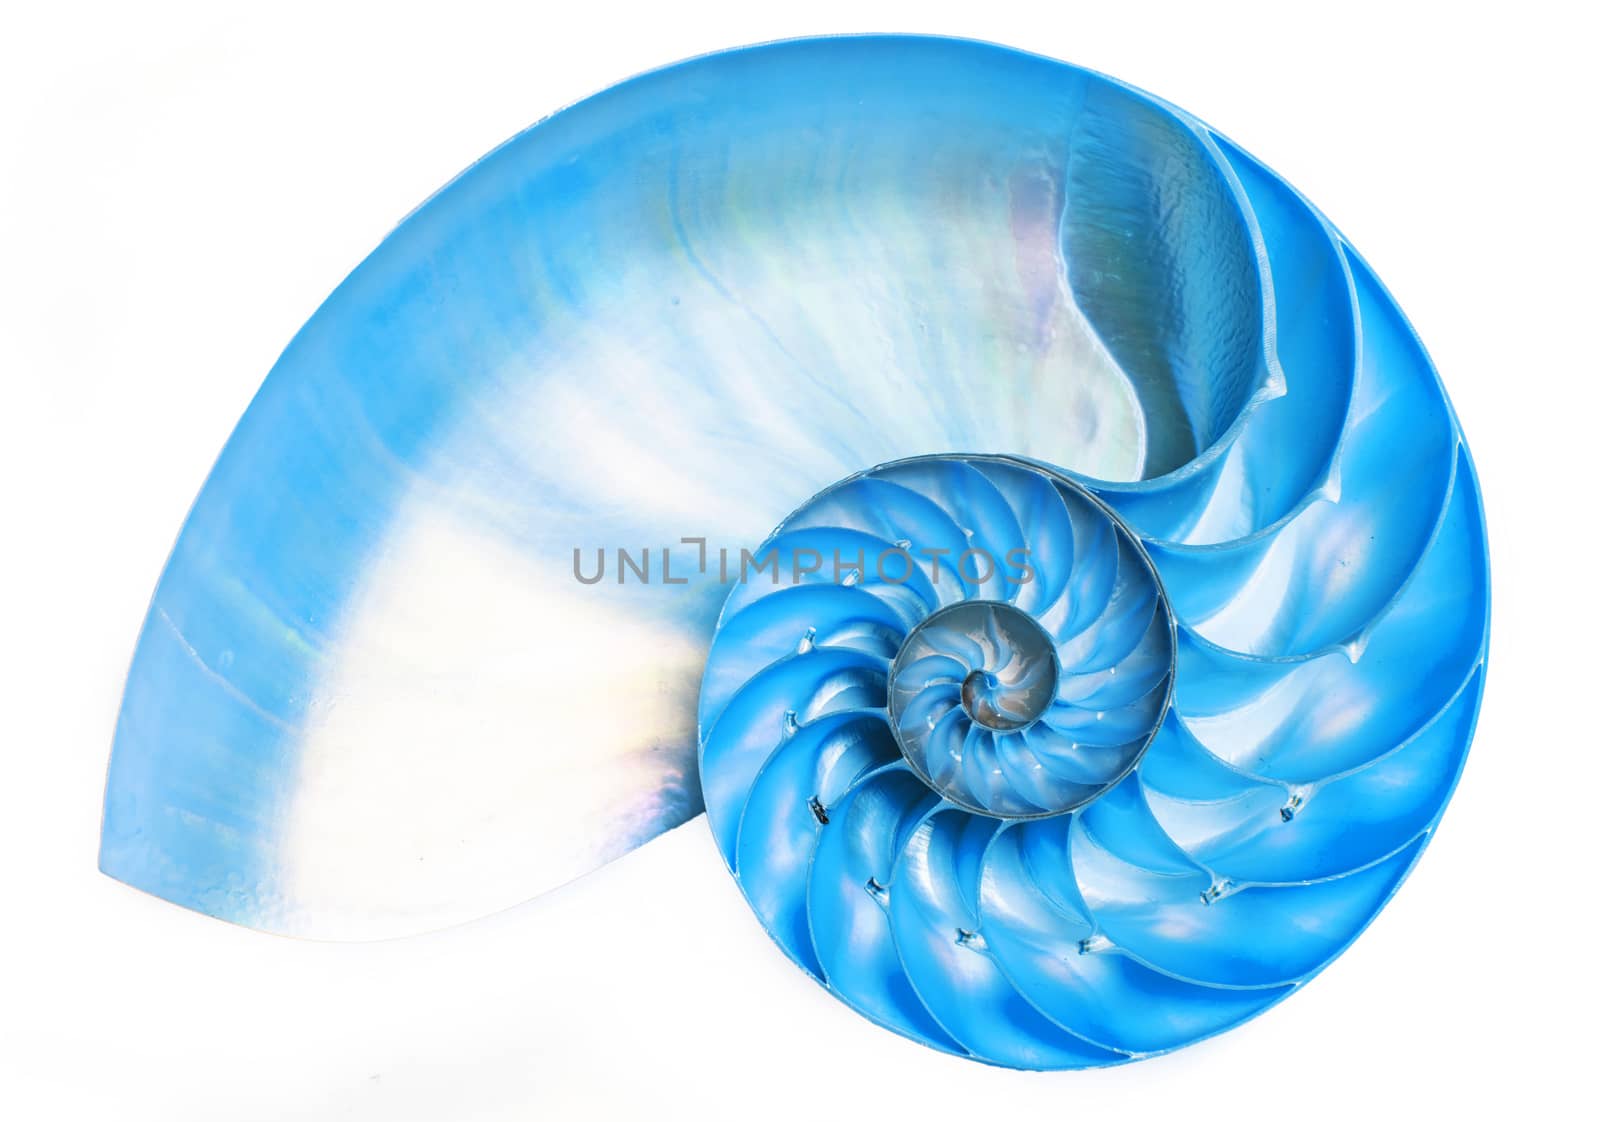 Detailed blue halved shell of a chambered nautilus (Nautilus pompilius) shows beautiful spiral pattern. Isolated on white